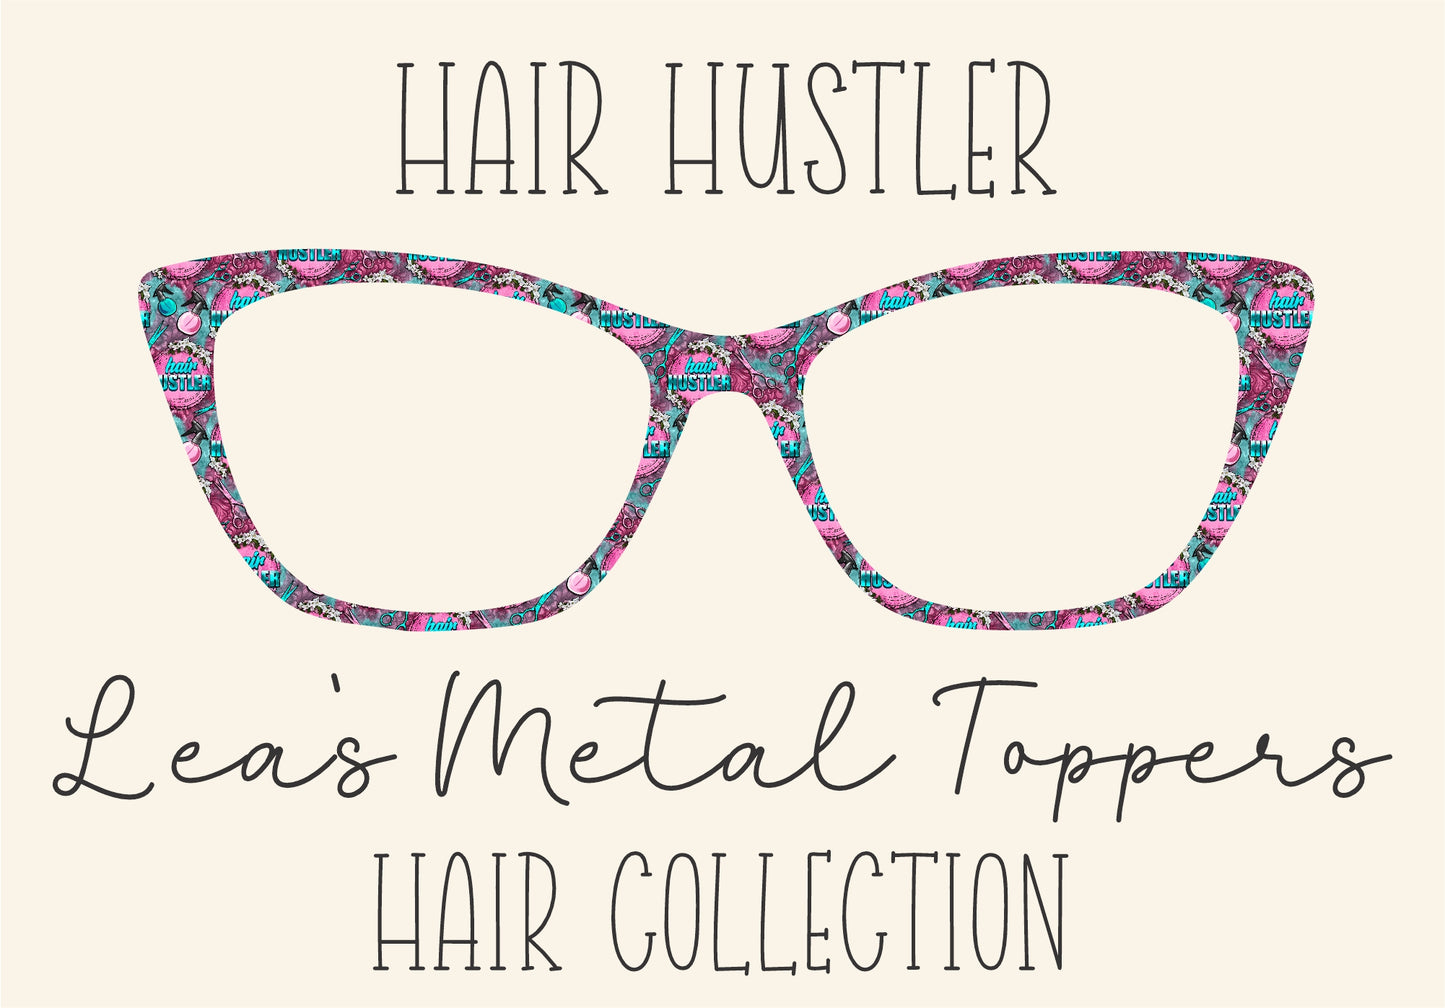 HAIR HUSTLER Eyewear Frame Toppers COMES WITH MAGNETS